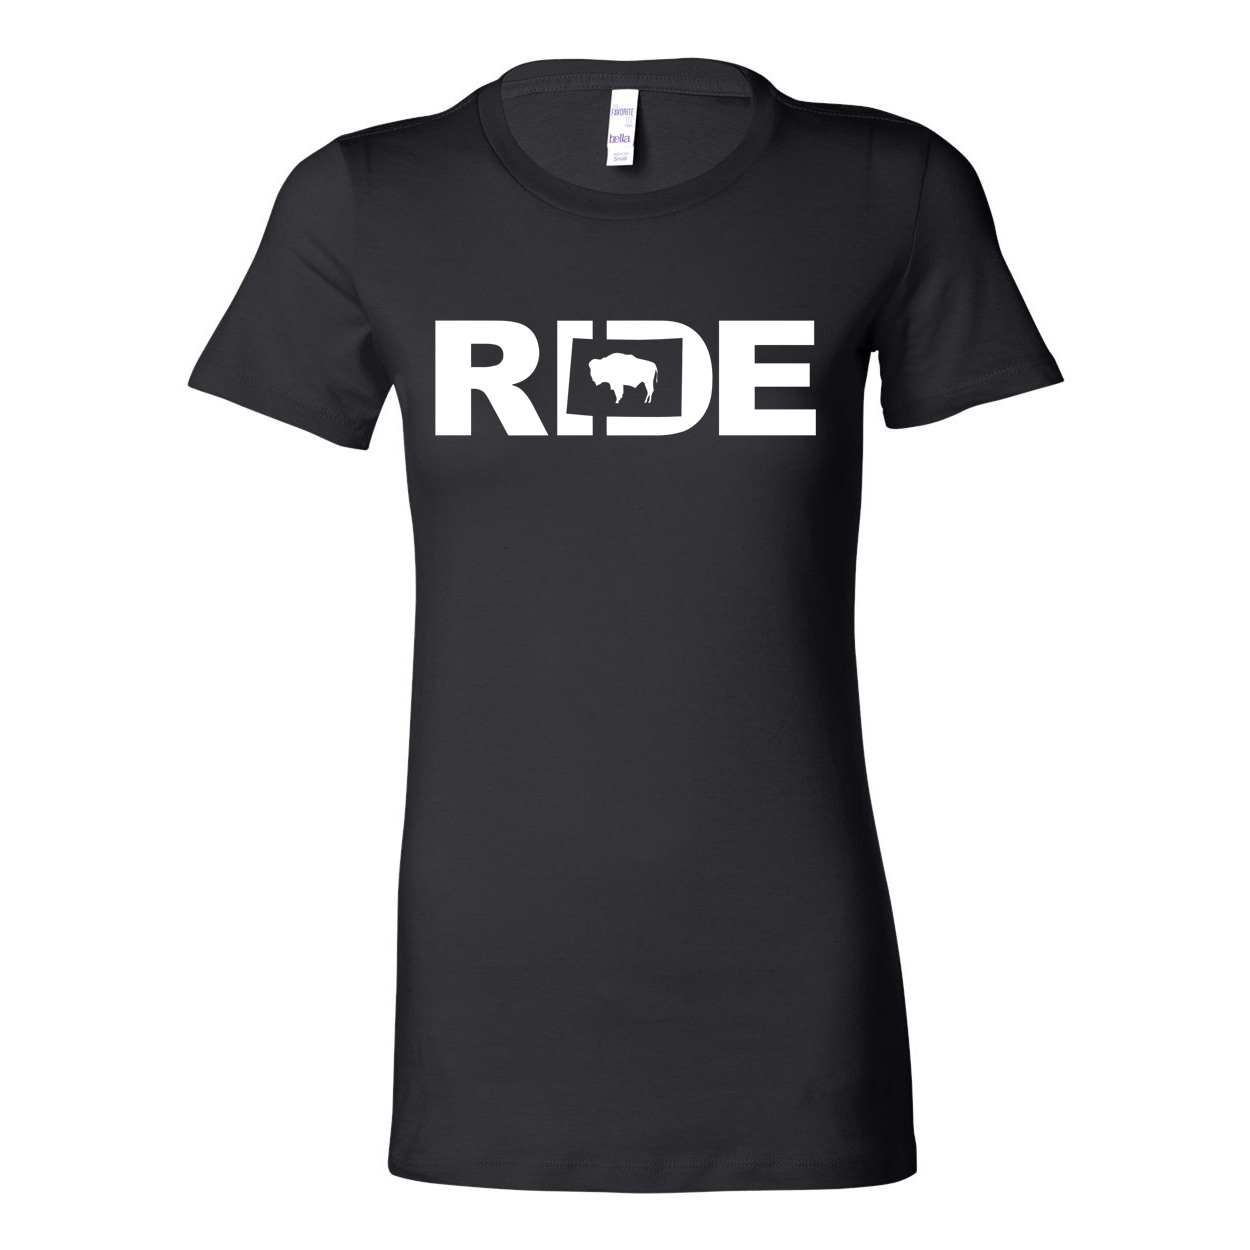 Ride Wyoming Classic Women's Fitted Tri-Blend T-Shirt Black (White Logo)